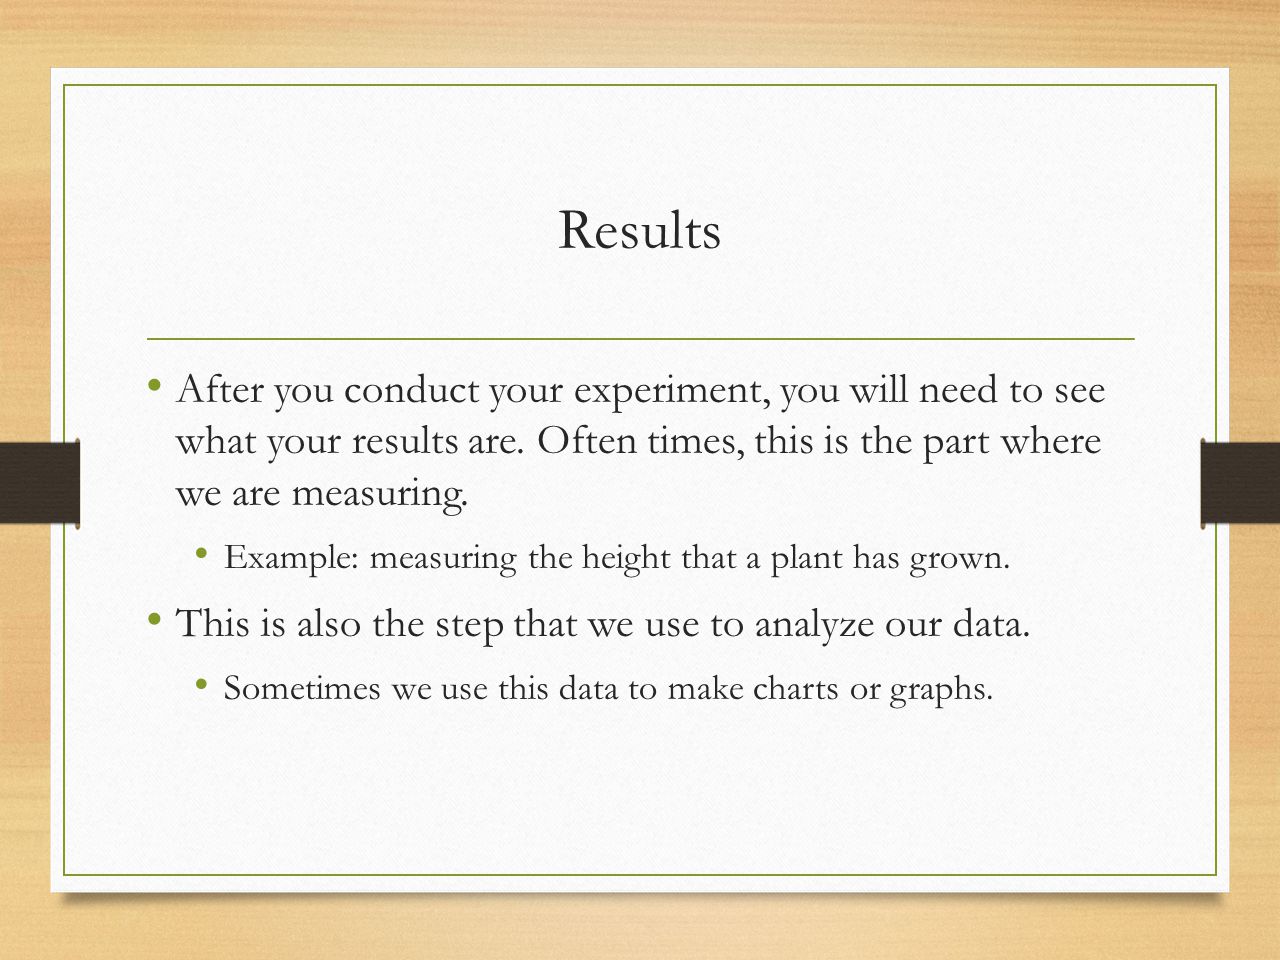 Results After you conduct your experiment, you will need to see what your results are. Often times, this is the part where we are measuring.